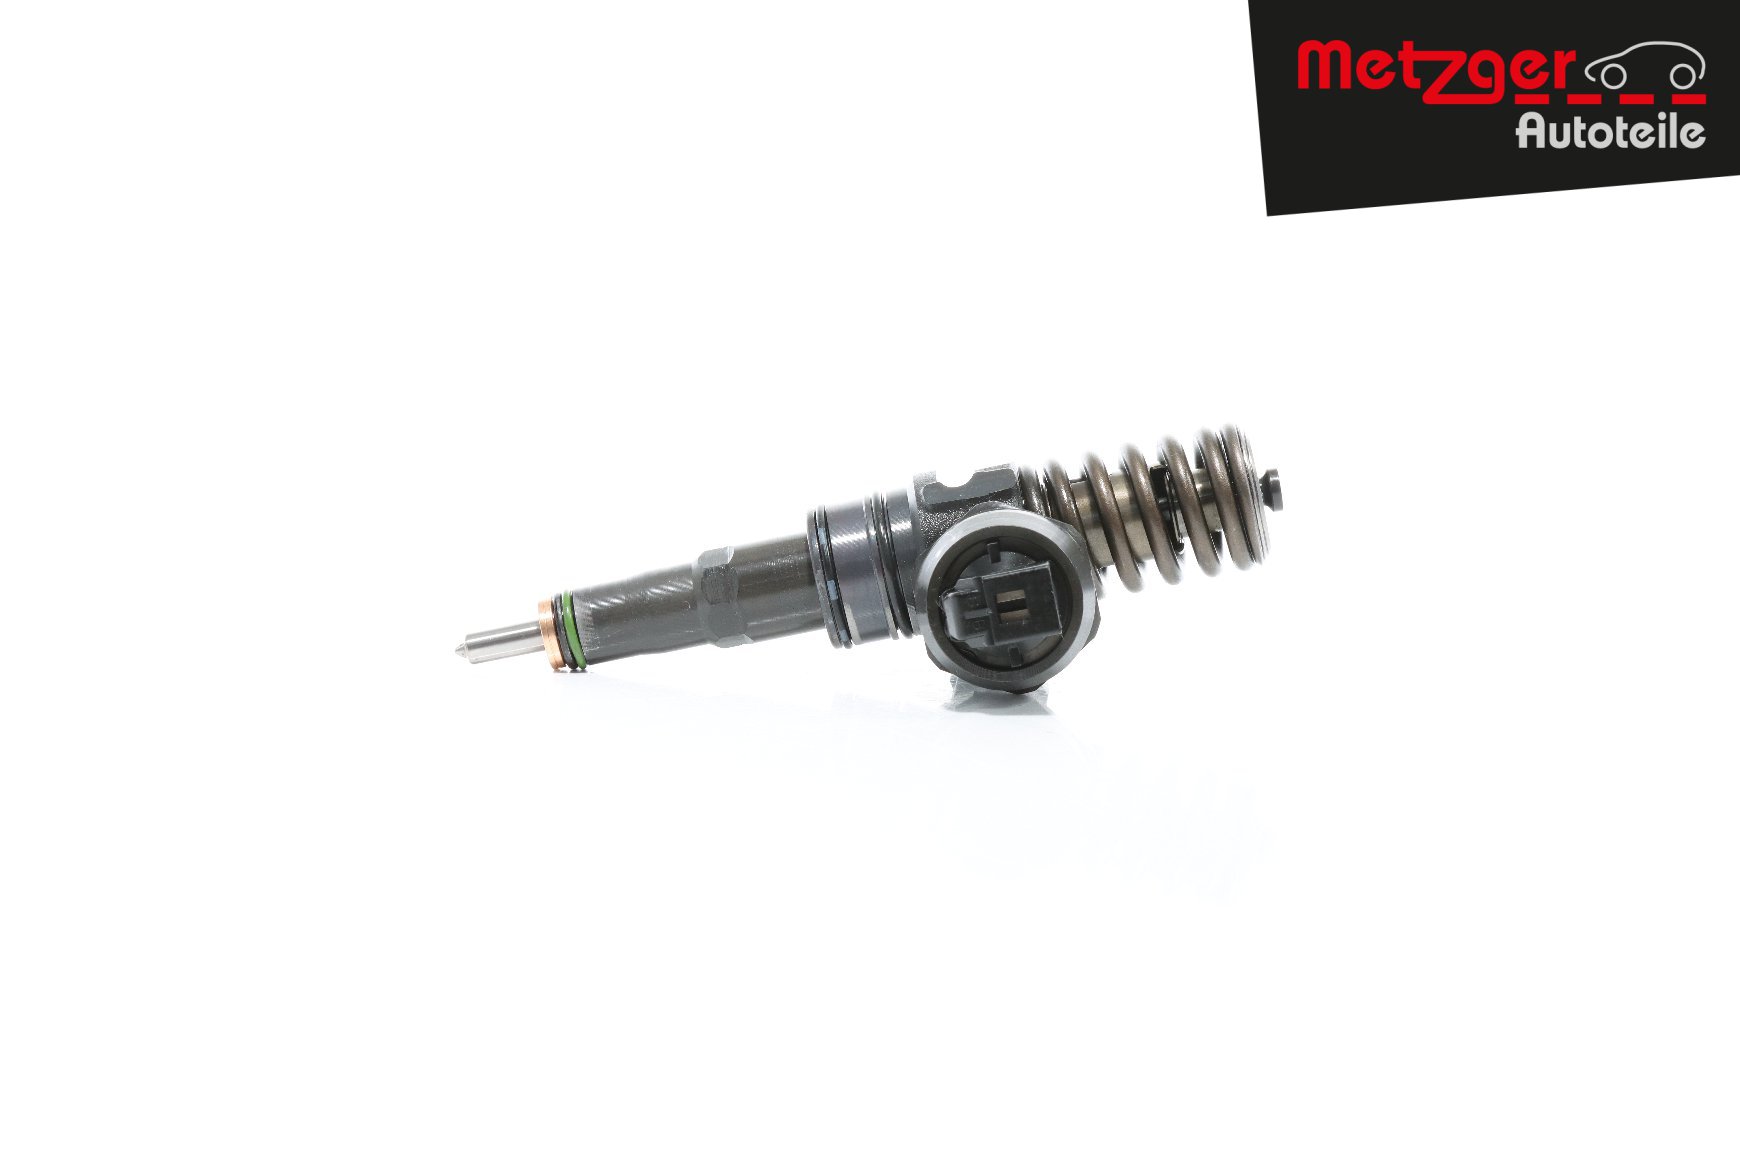 METZGER Injector nozzles diesel and petrol Touran Mk1 new 0872015